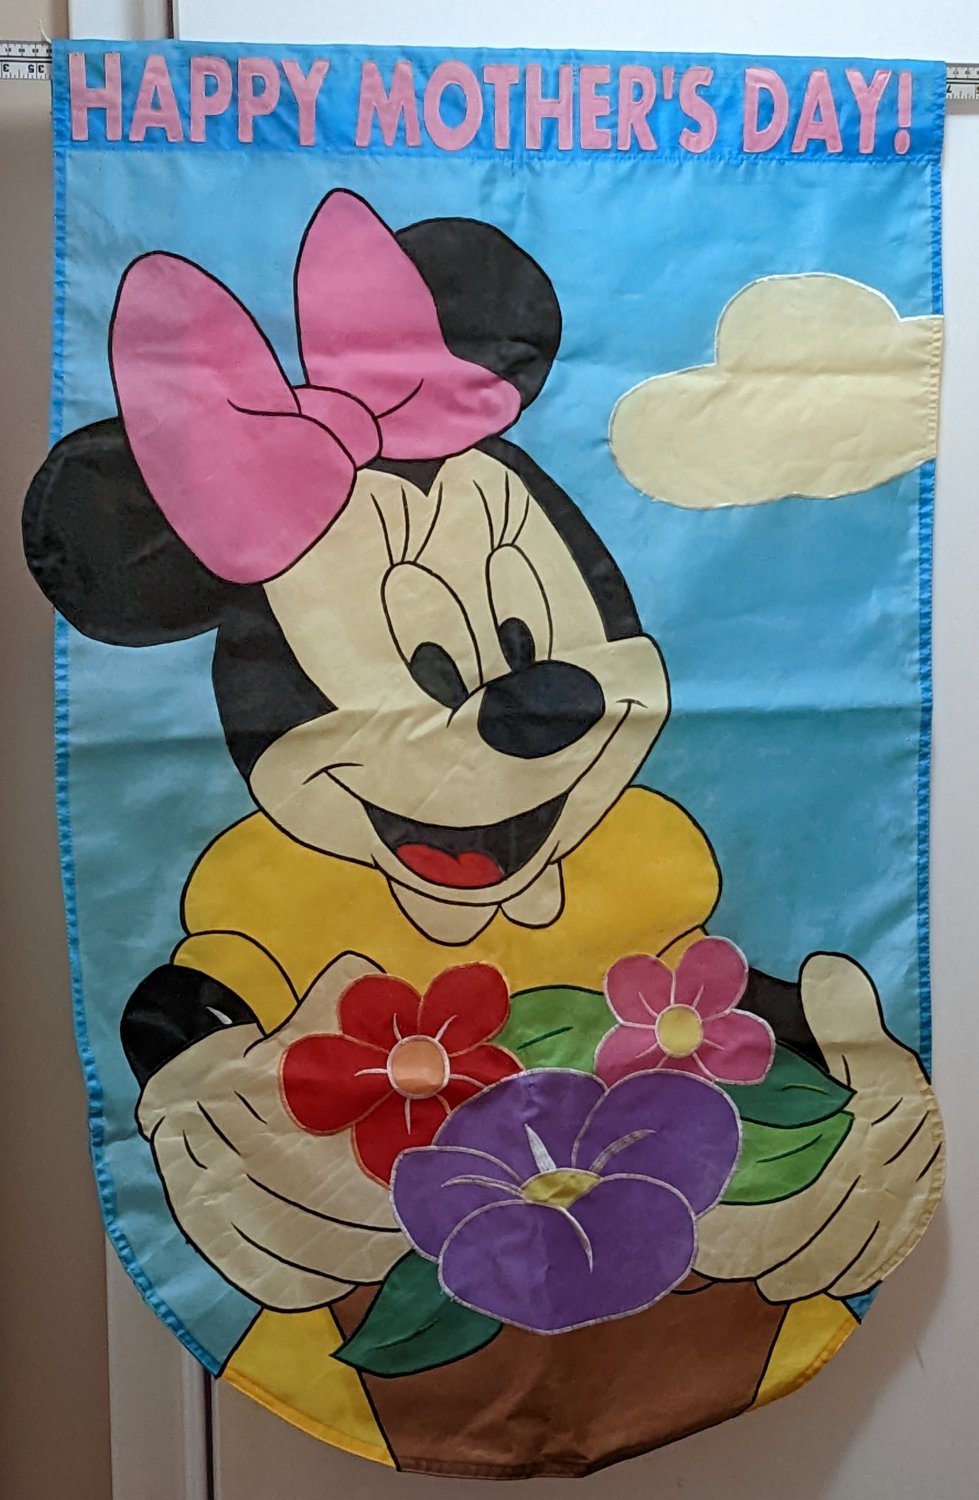 Disney Minnie Mouse Happy Mother's Day Decorative Garden Flag 100% Nylon NCE 1998